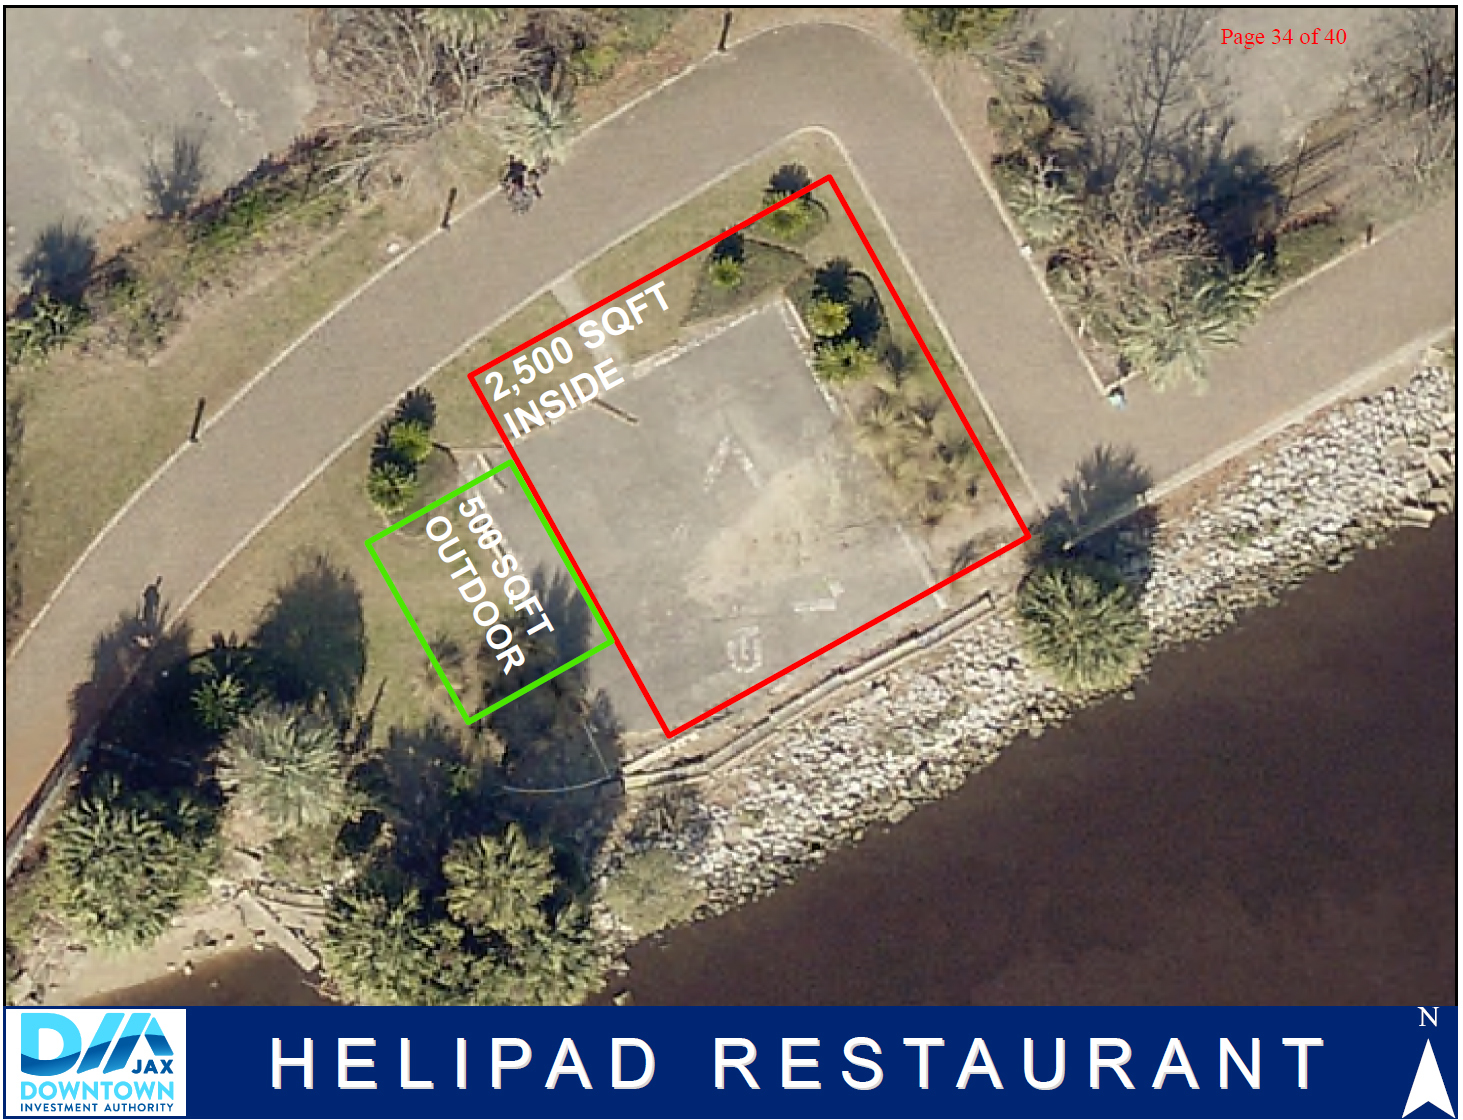 A riverfront restaurant could be located at the property's helipad.